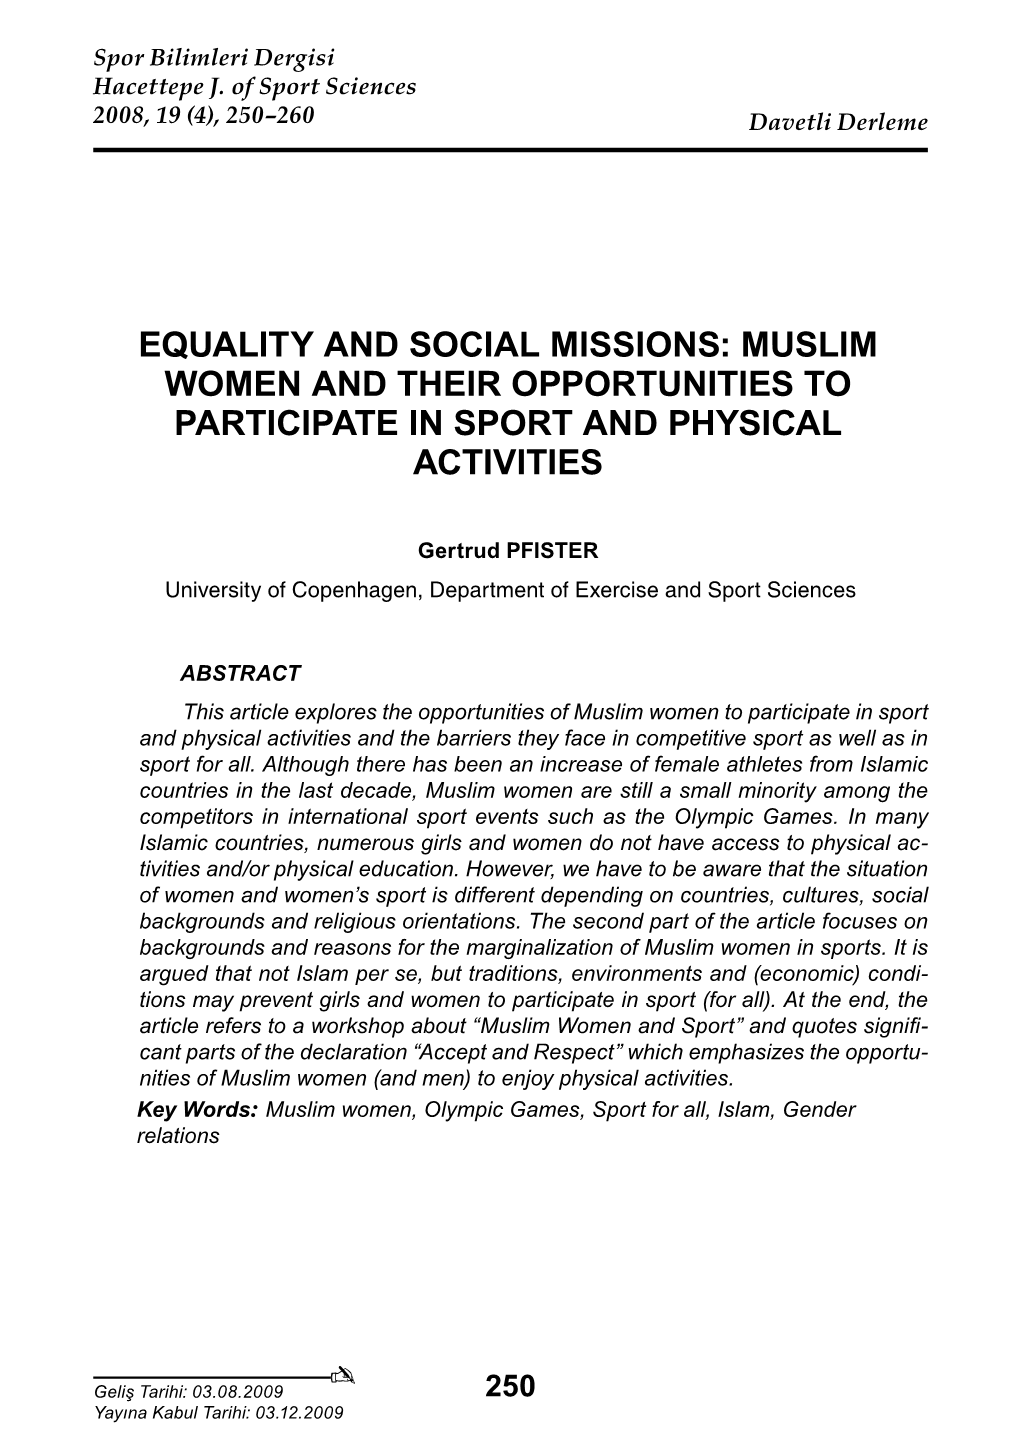 Muslim Women and Their Opportunities to Participate in Sport and Physical Activities